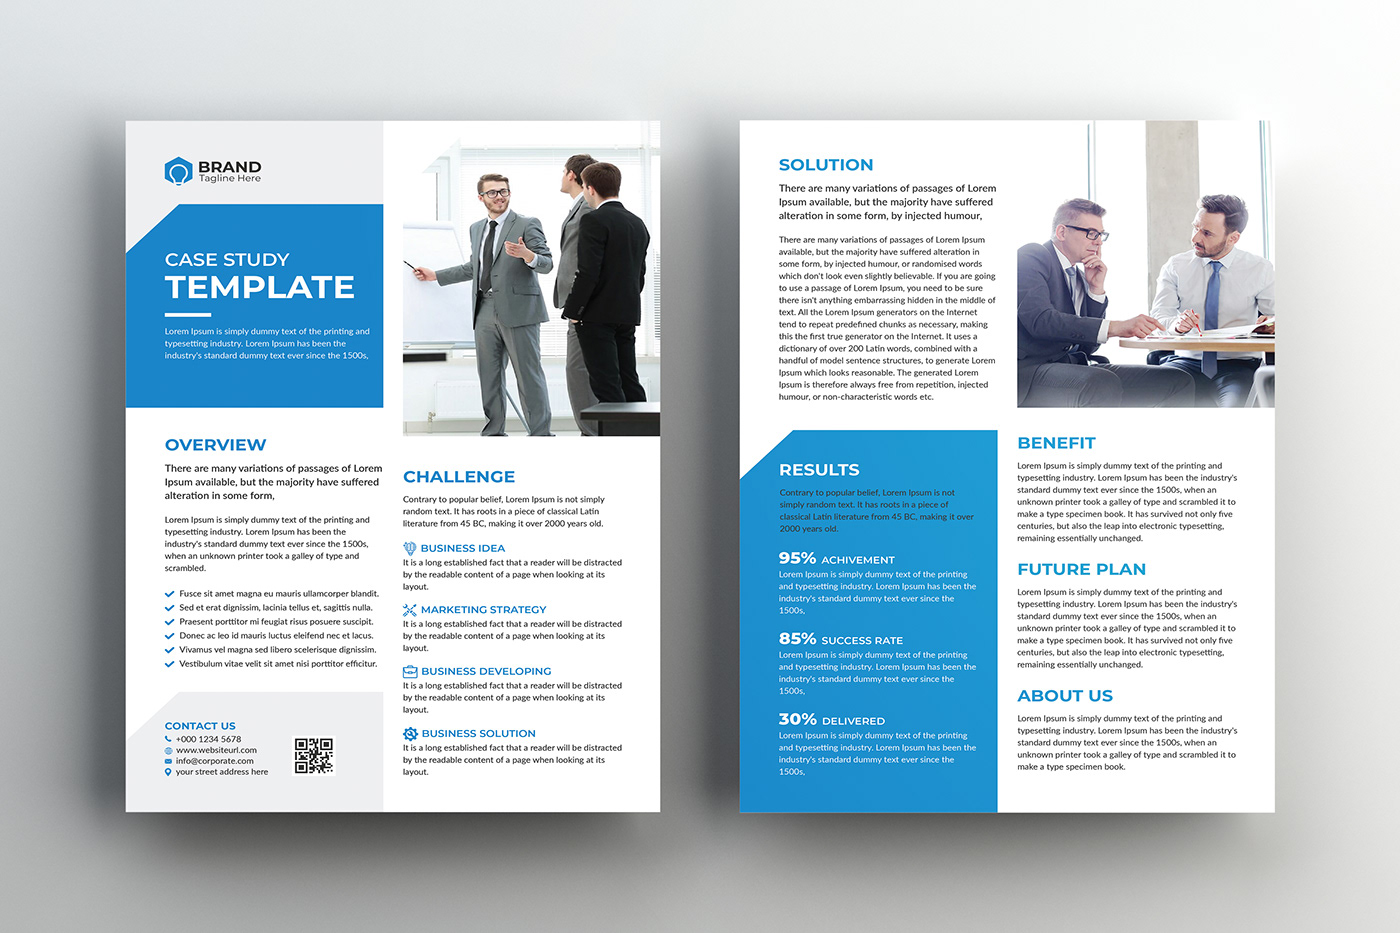 #BEST CASE STUDY #booklet #CASE HISTORY #Case Study #catalog #Corporate   #flyer #multipurpose #newsletter  #research